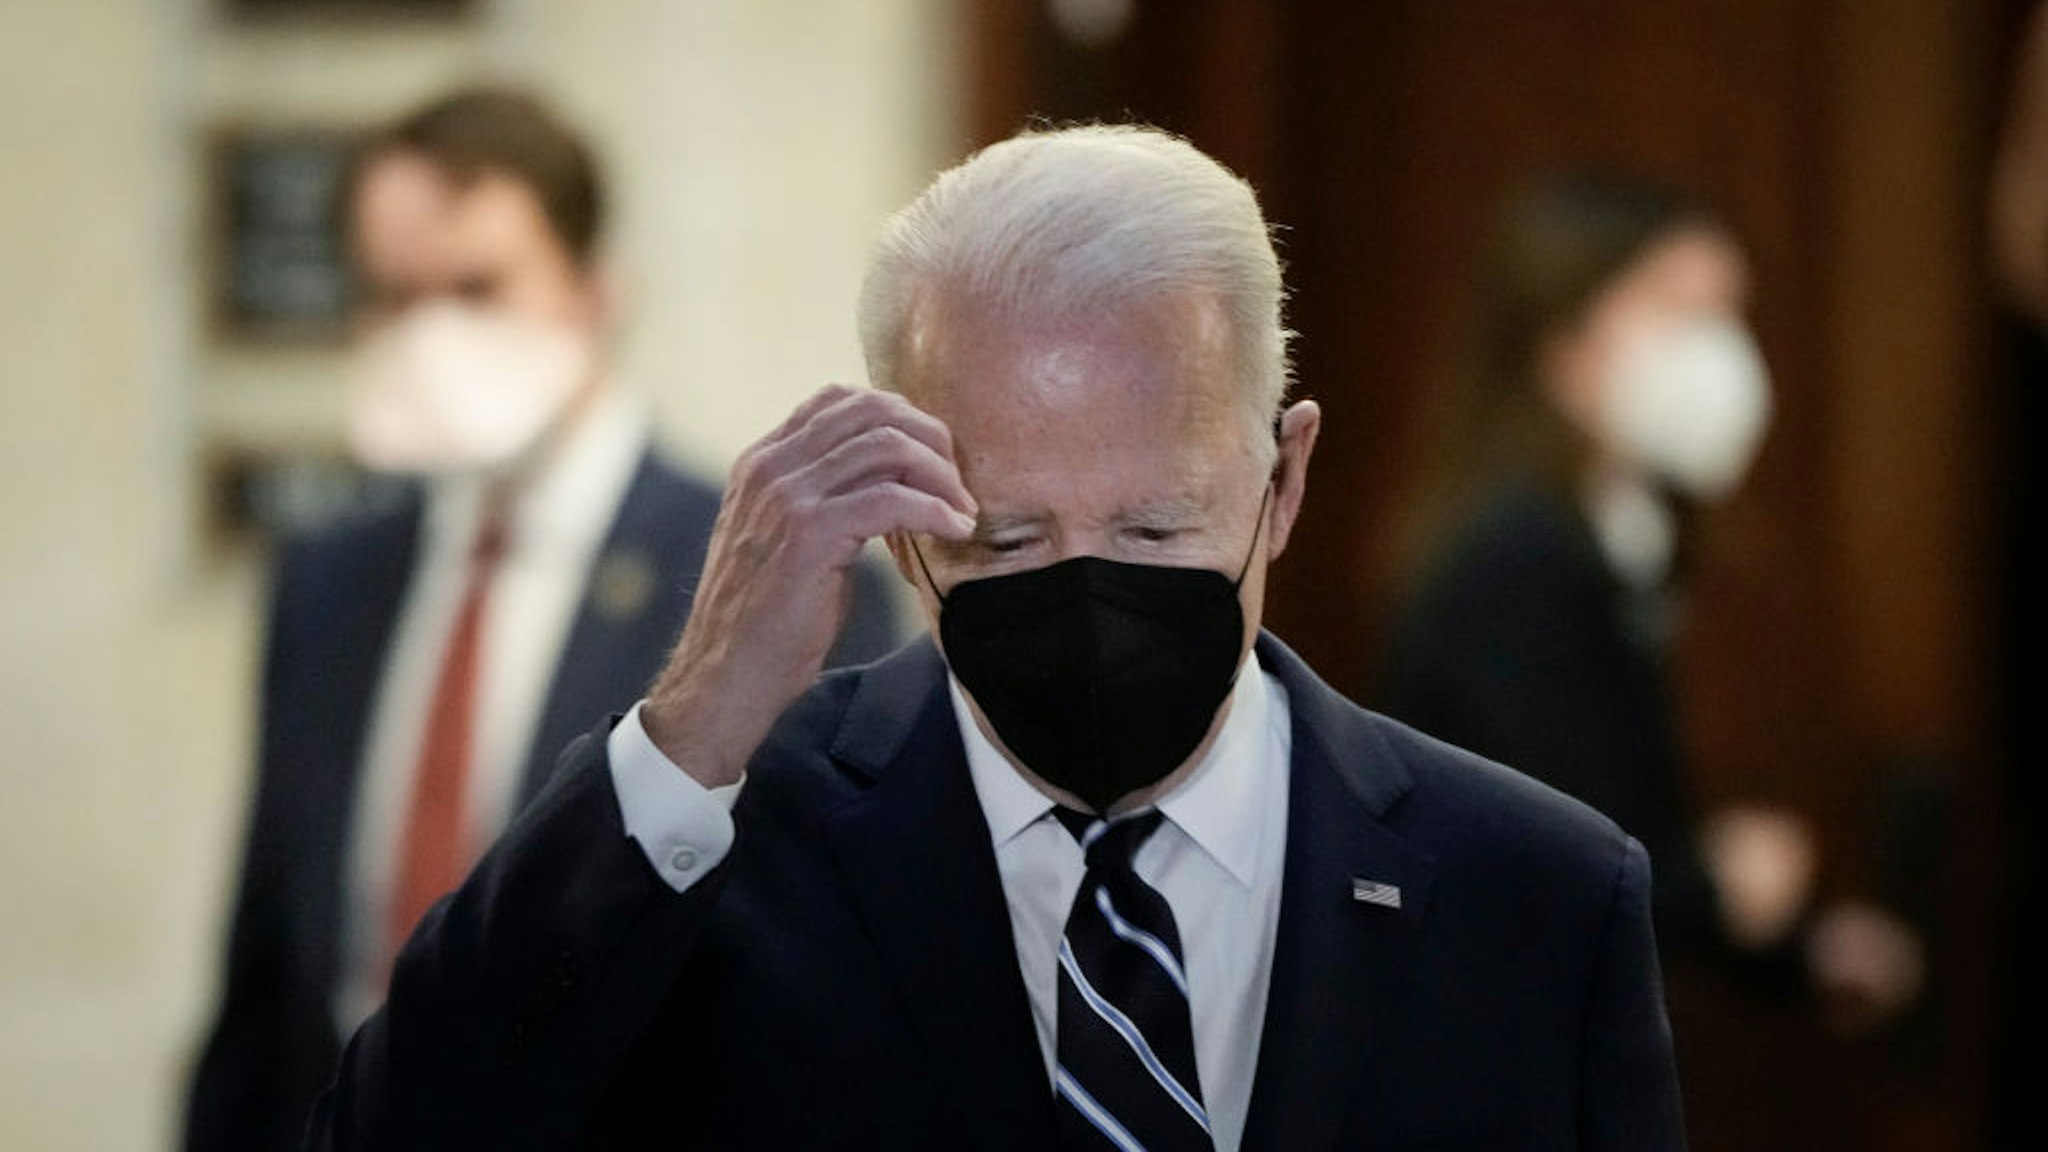 WASHINGTON, DC - JANUARY 13: U.S. President Joe Biden leaves a meeting with Senate Democrats in the Russell Senate Office Building on Capitol Hill on January 13, 2022 in Washington, DC. Biden has called on his fellow Democrats to go around Republican opposition, do away with the 60-vote threshold for advancing legislation in the Senate and pass the John Lewis Voting Rights Advancement Act and the Freedom To Vote Act. The strategy is in doubt due to opposition from Sen. Joe Manchin (D-WV) and Sen. Kyrsten Sinema (D-AZ). (Photo by Drew Angerer/Getty Images)